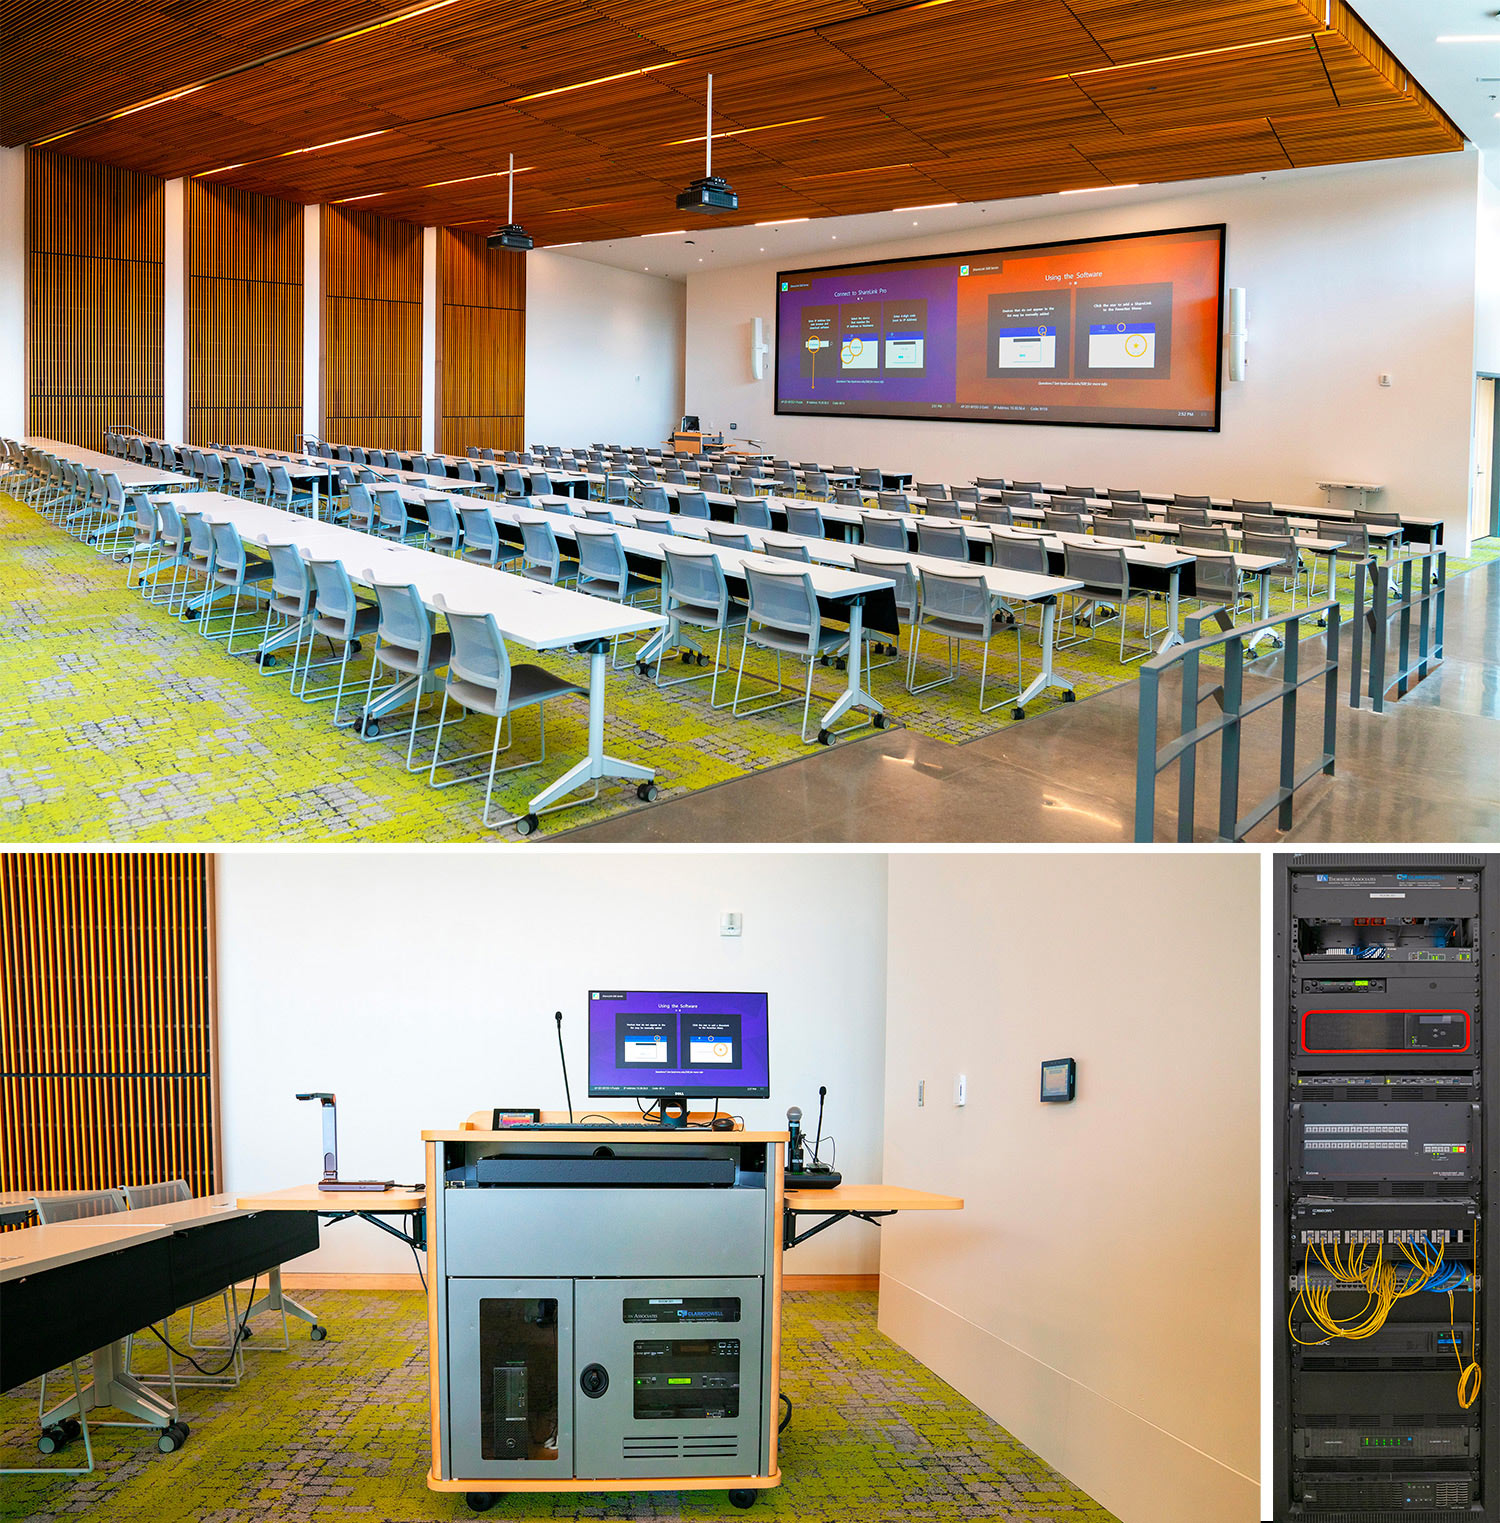 Classroom 201 is a 150-seat lecture hall. The AV system includes two projectors, a flat panel confidence monitor, wired and wireless mics, two ShareLink Pro presentation gateways, an Annotator 300 annotation processor with a laptop on the lectern serving as the annotation interface, an XTP matrix switcher, XTP AV signal distribution, and TouchLink Pro touchpanels on the wall and on the lectern.